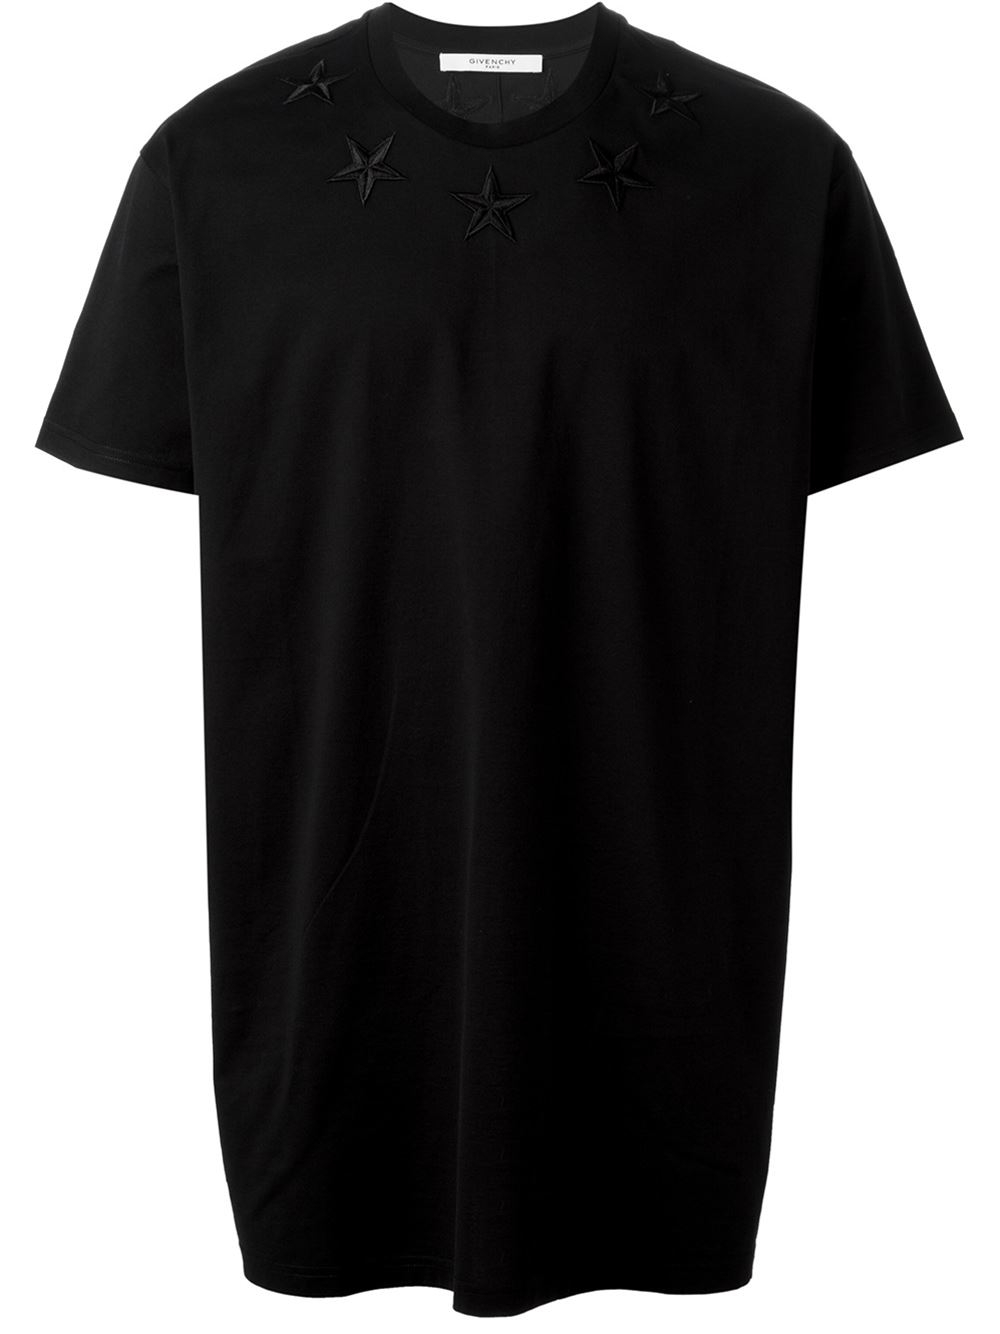 Star-Embroidered Cotton T-Shirt 